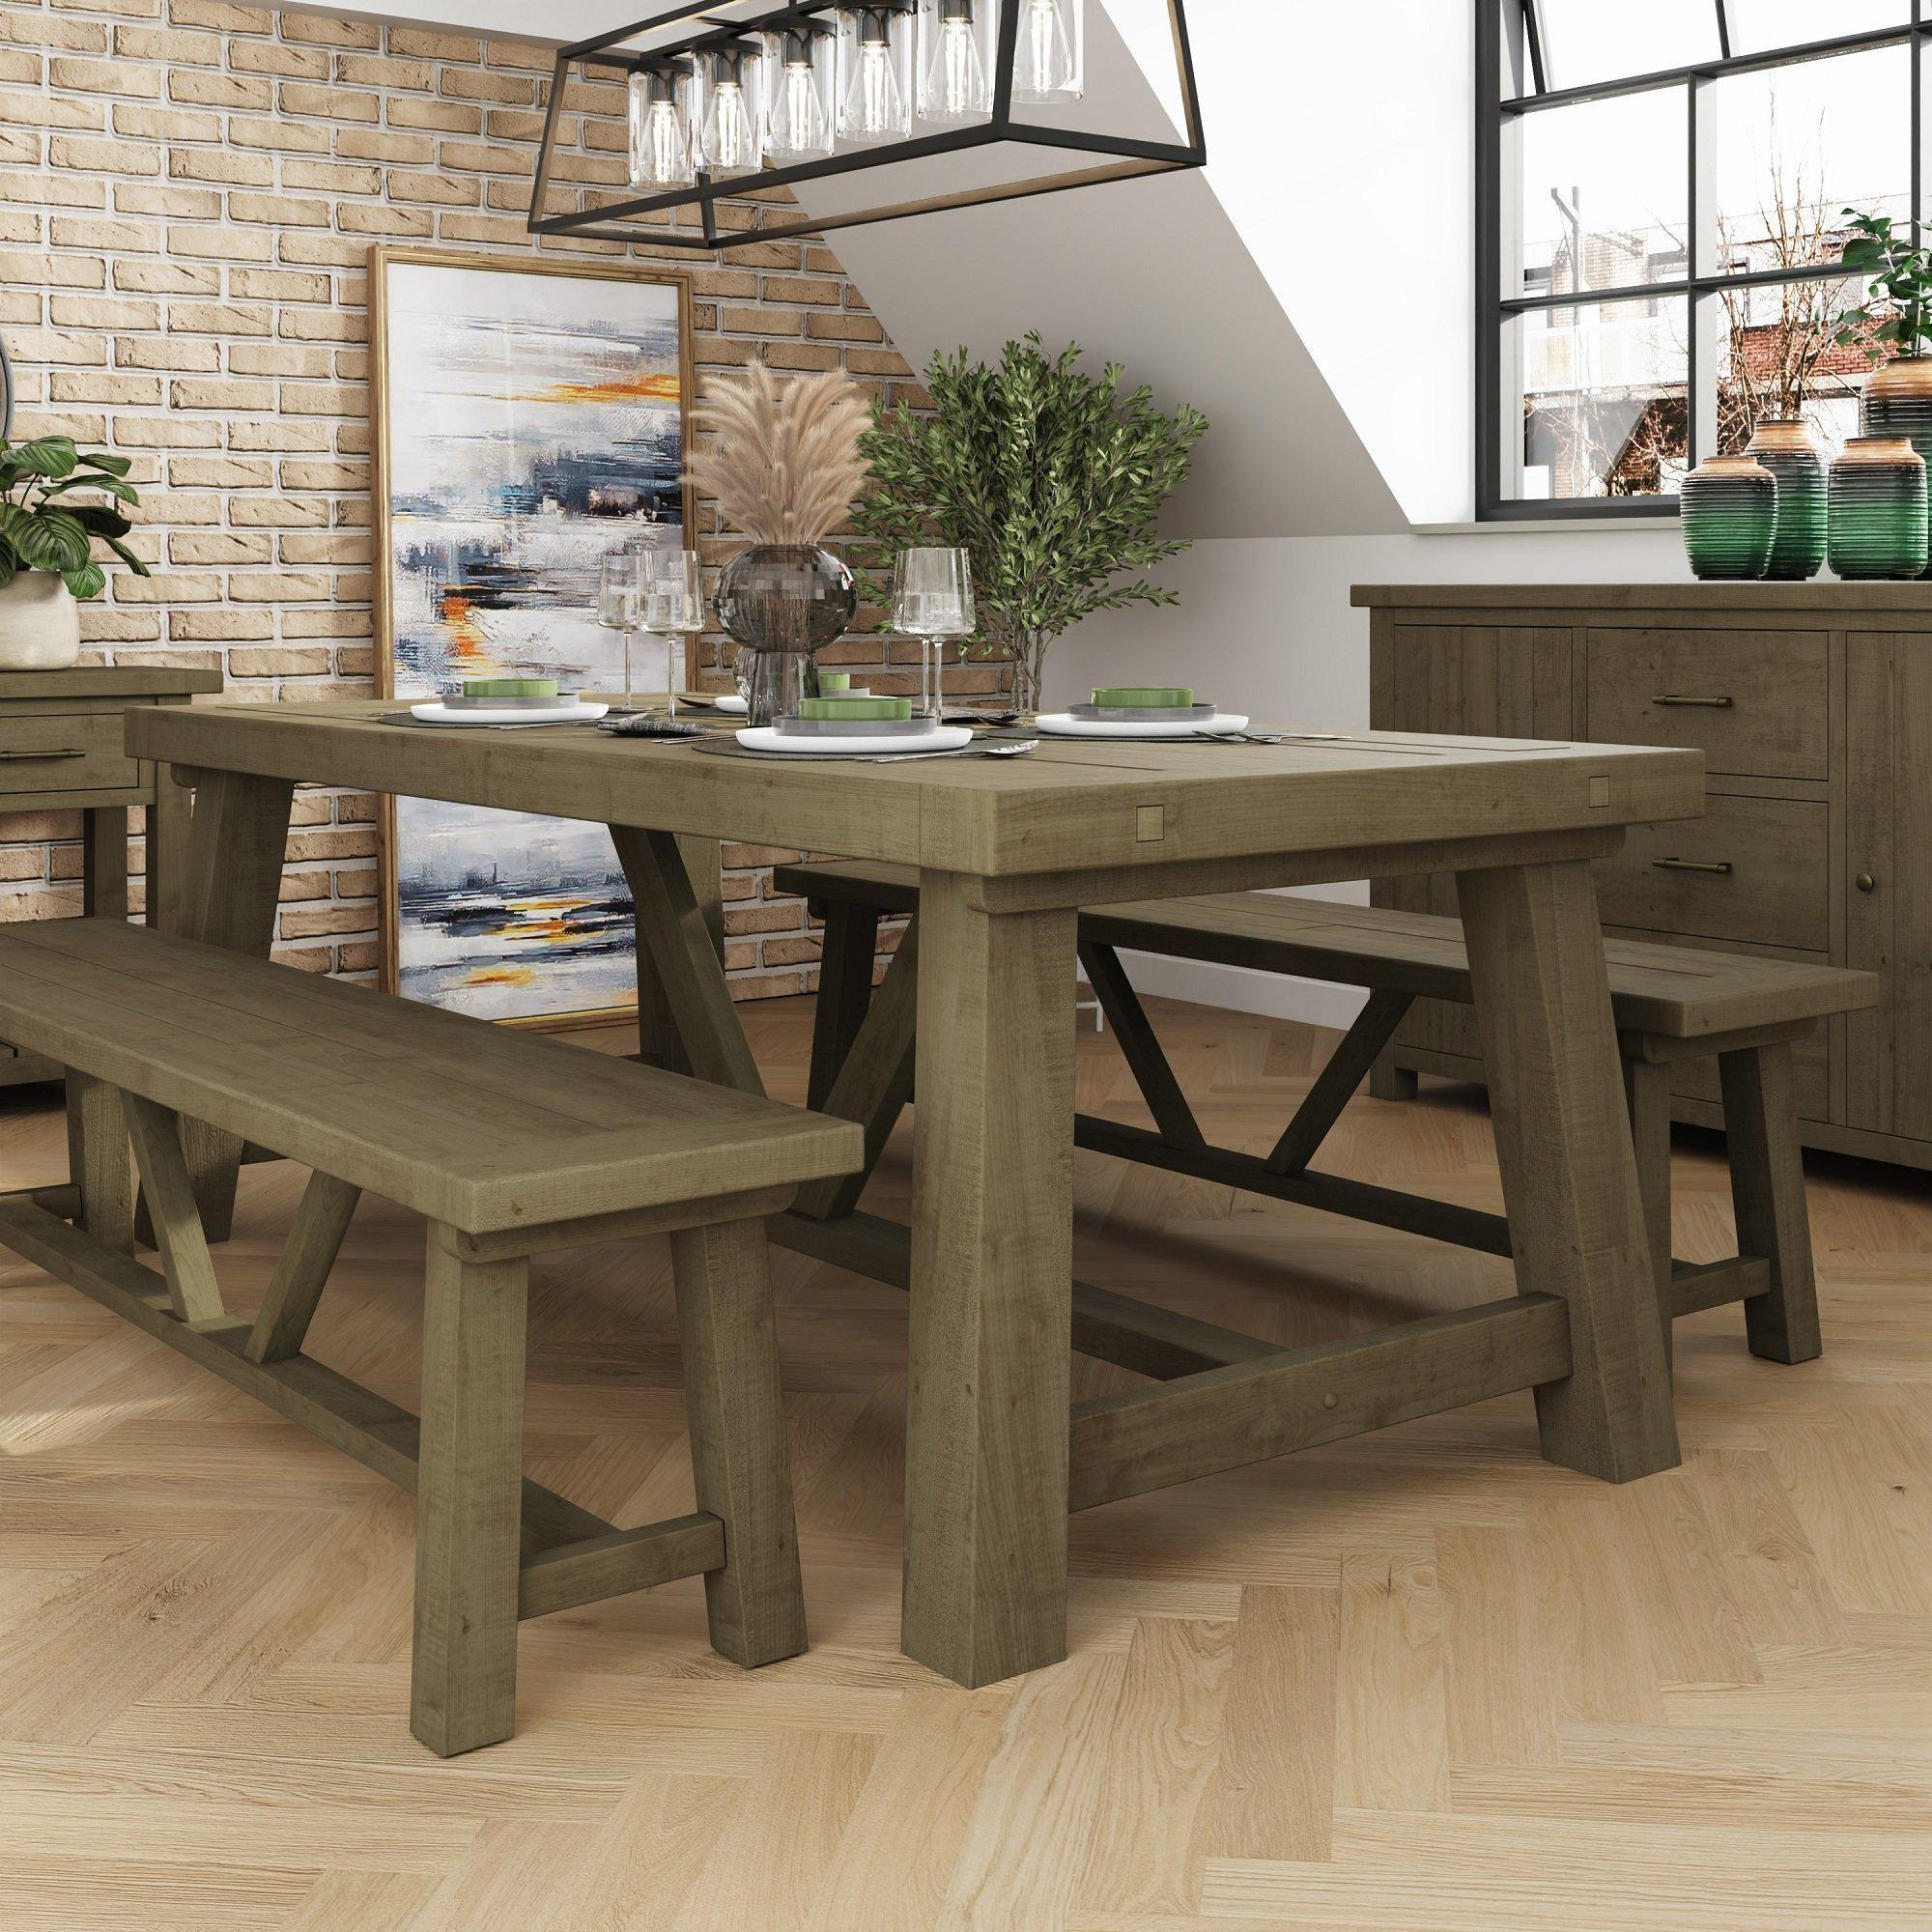 1.6m Fixed Solid Reclaimed Pine Dining Table With 6 Solid Pine Chairs & Extension Leaf - image 1